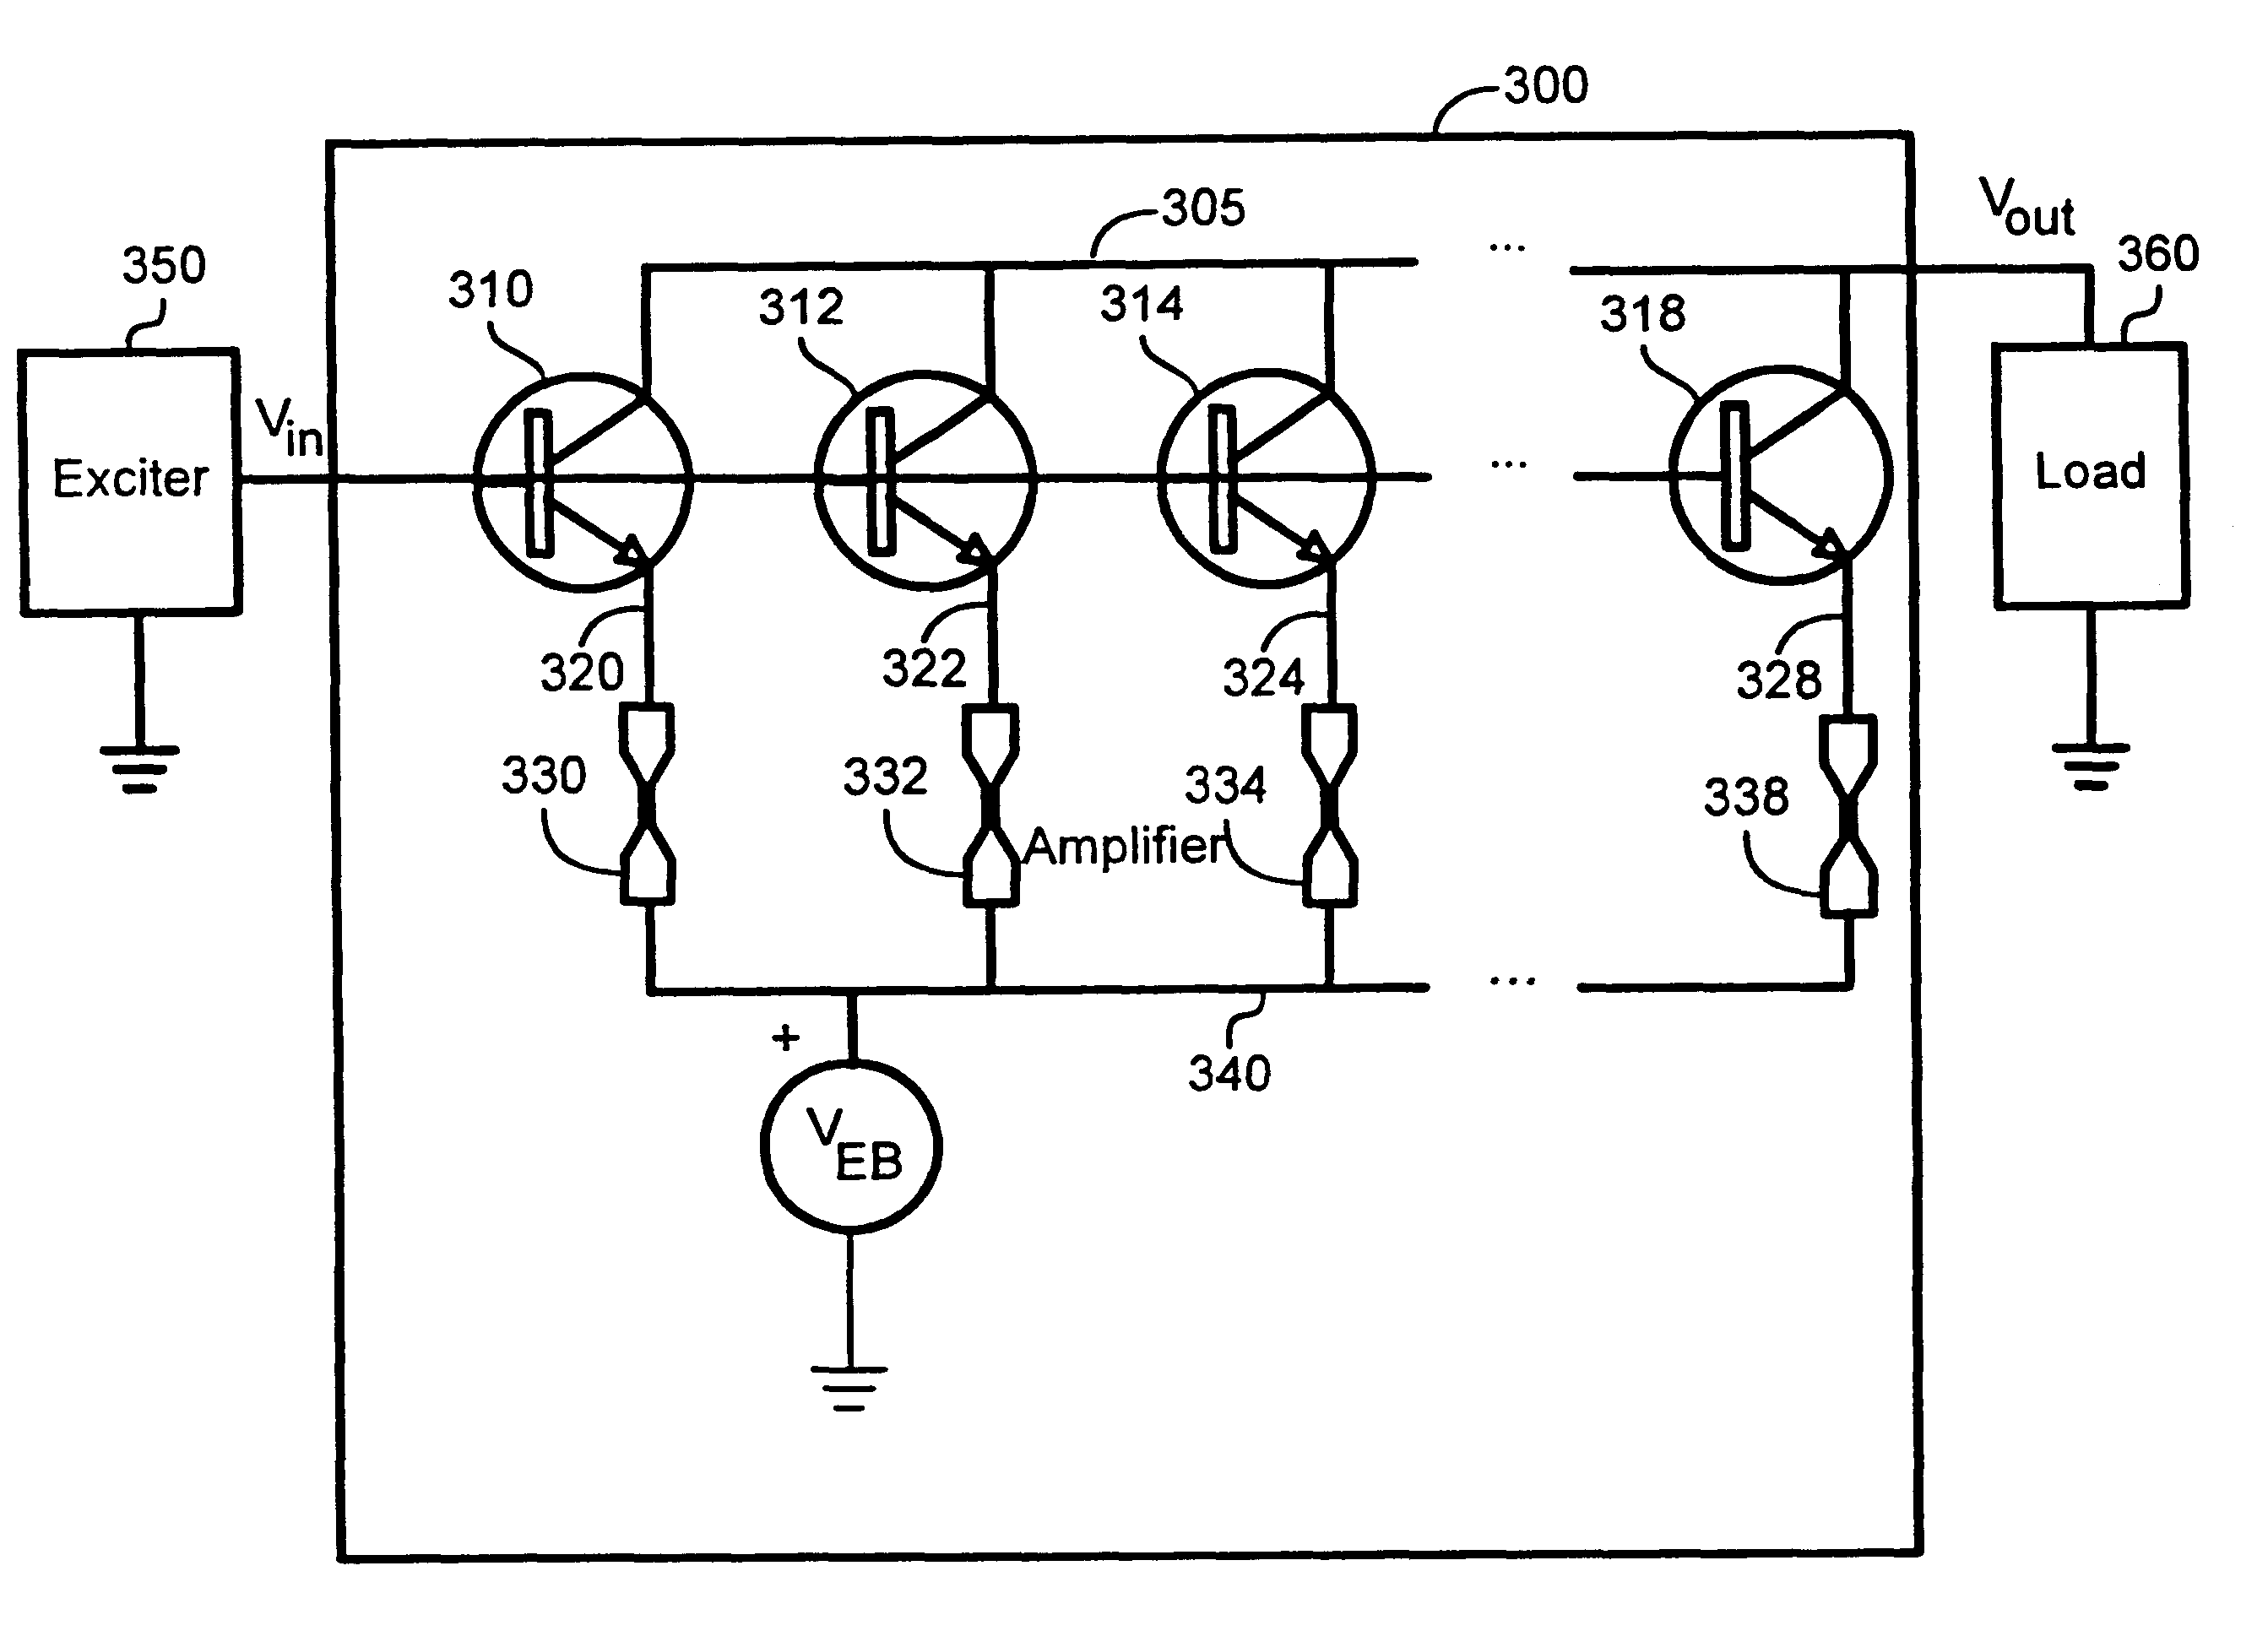 Protection scheme for multi-transistor amplifiers